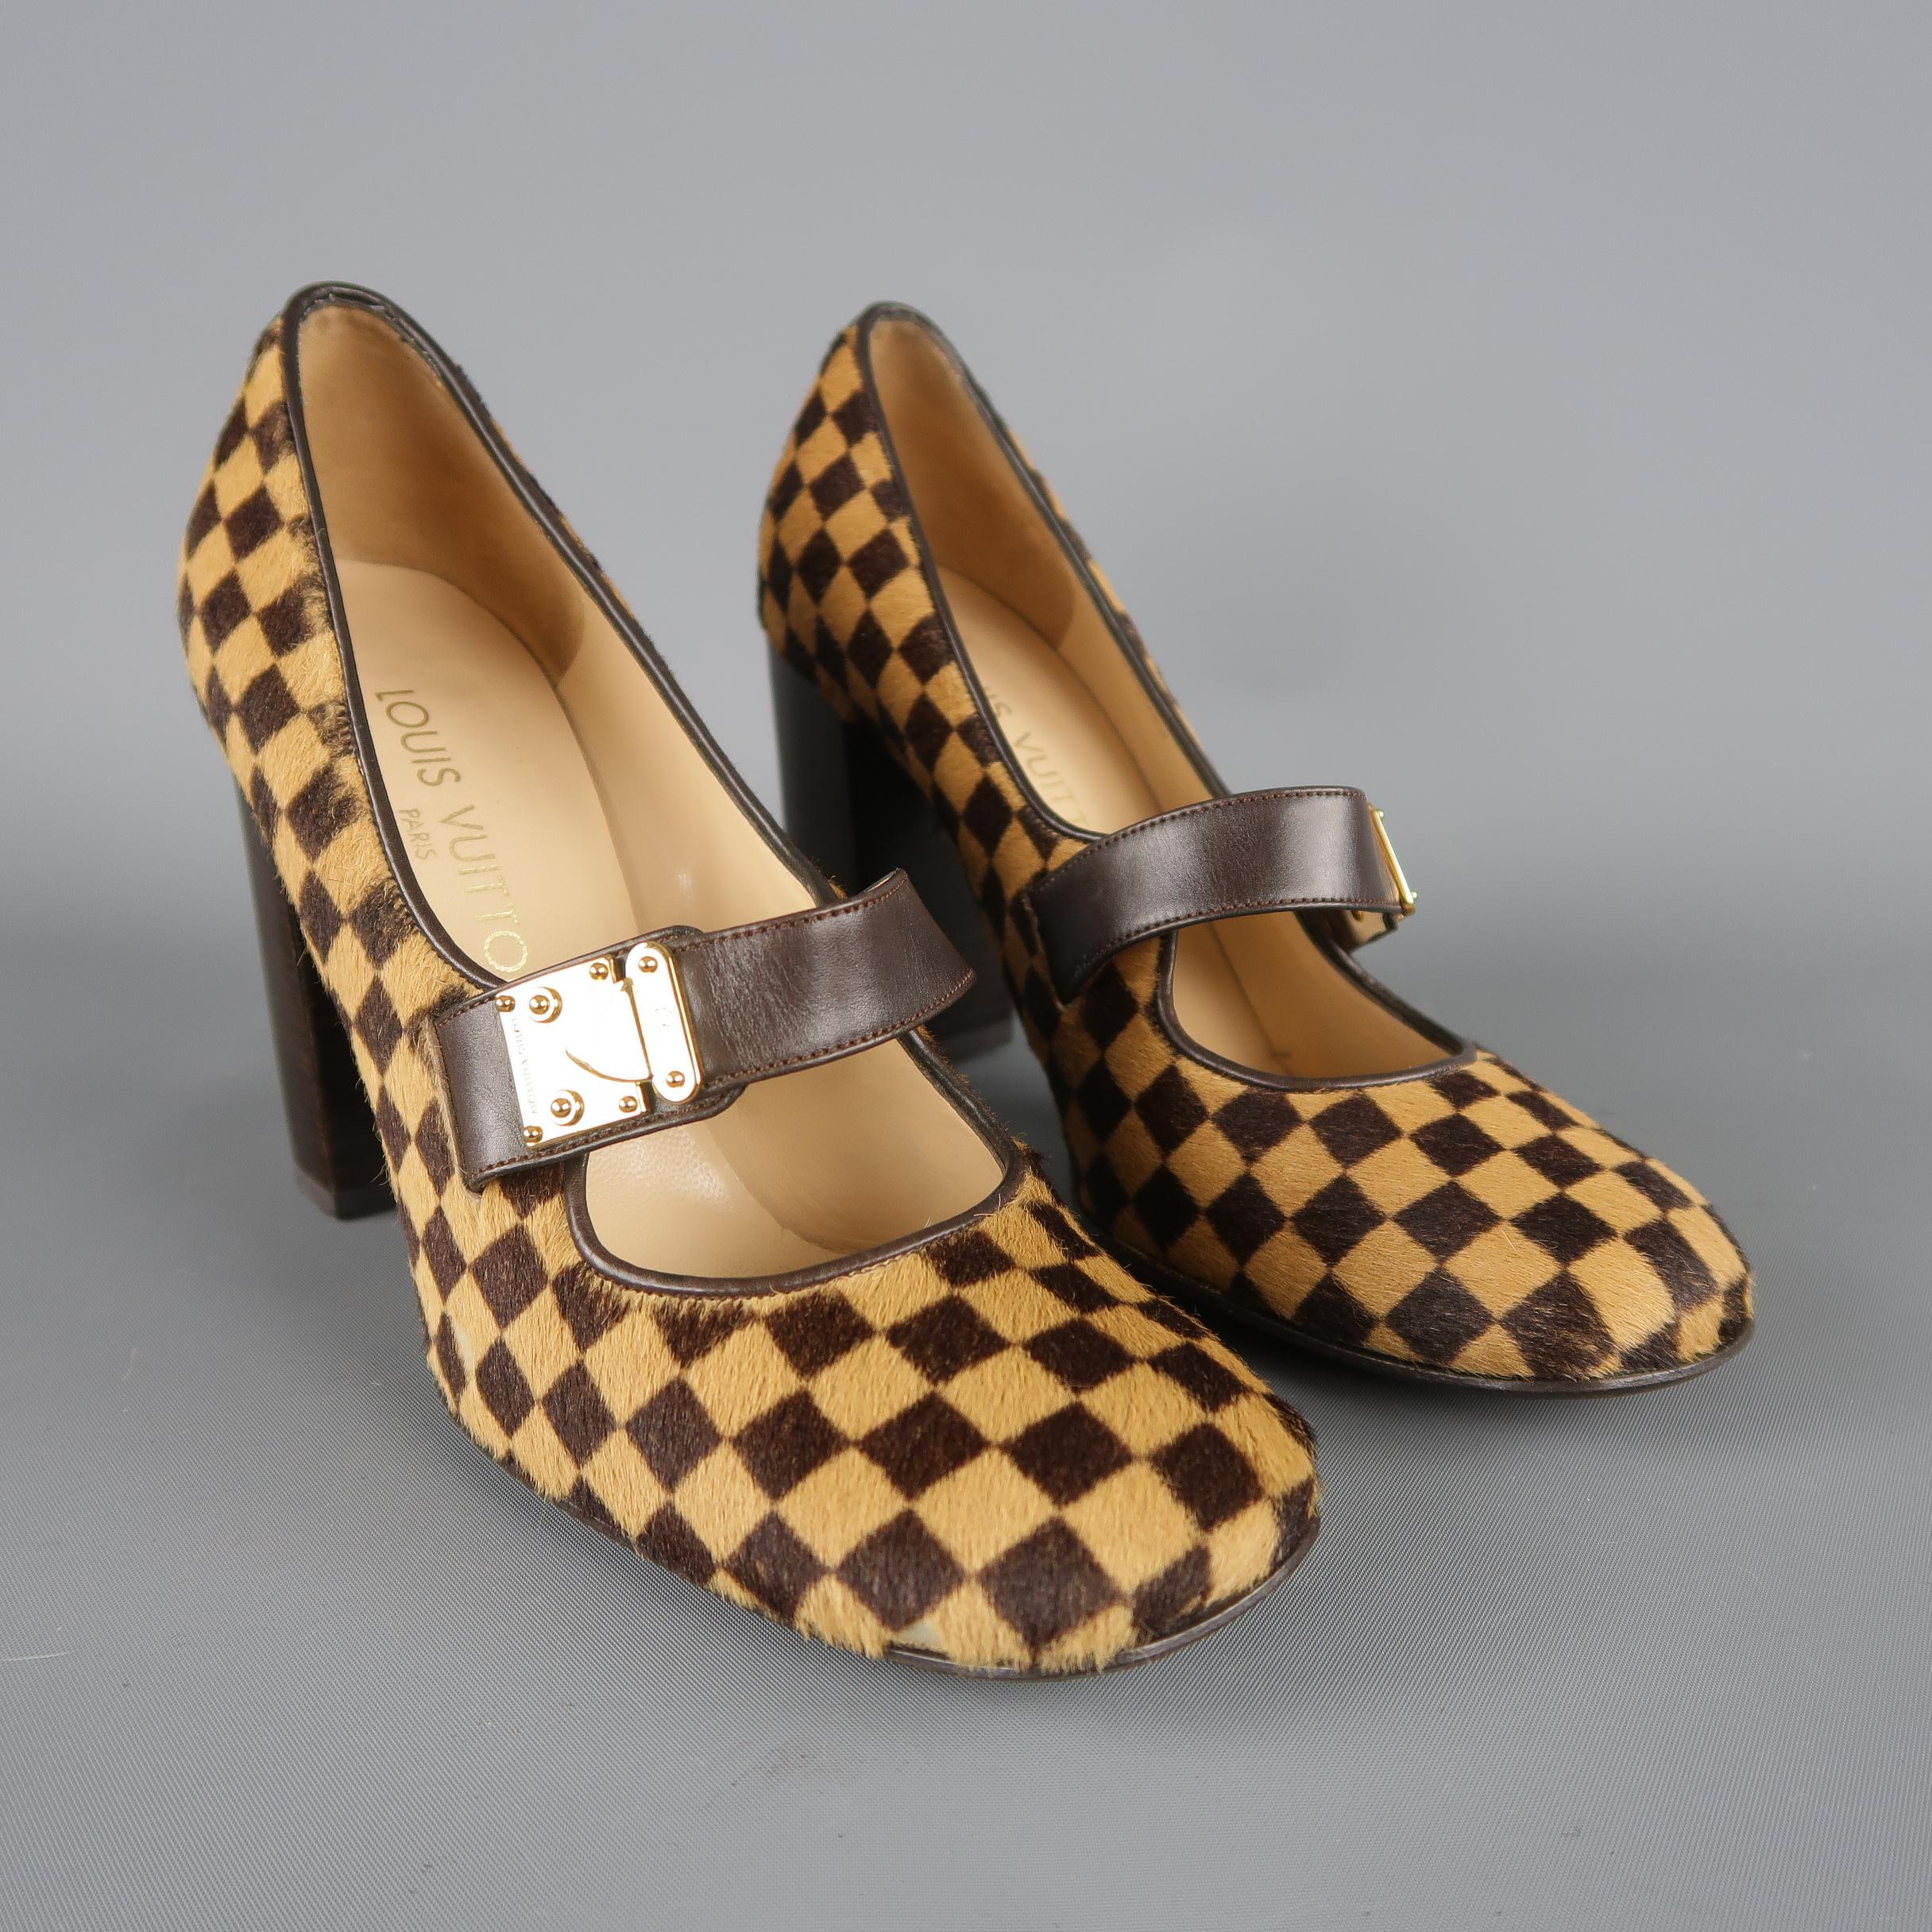 Fabulous statement pumps by Louis Vuitton. A retro inspired style in gorgeous tan and chocolate brown Damier checkered pony hair featuring a rounded square toe, thick chocolate brown leather Mary Jane strap with gold tone decorative LV engraved